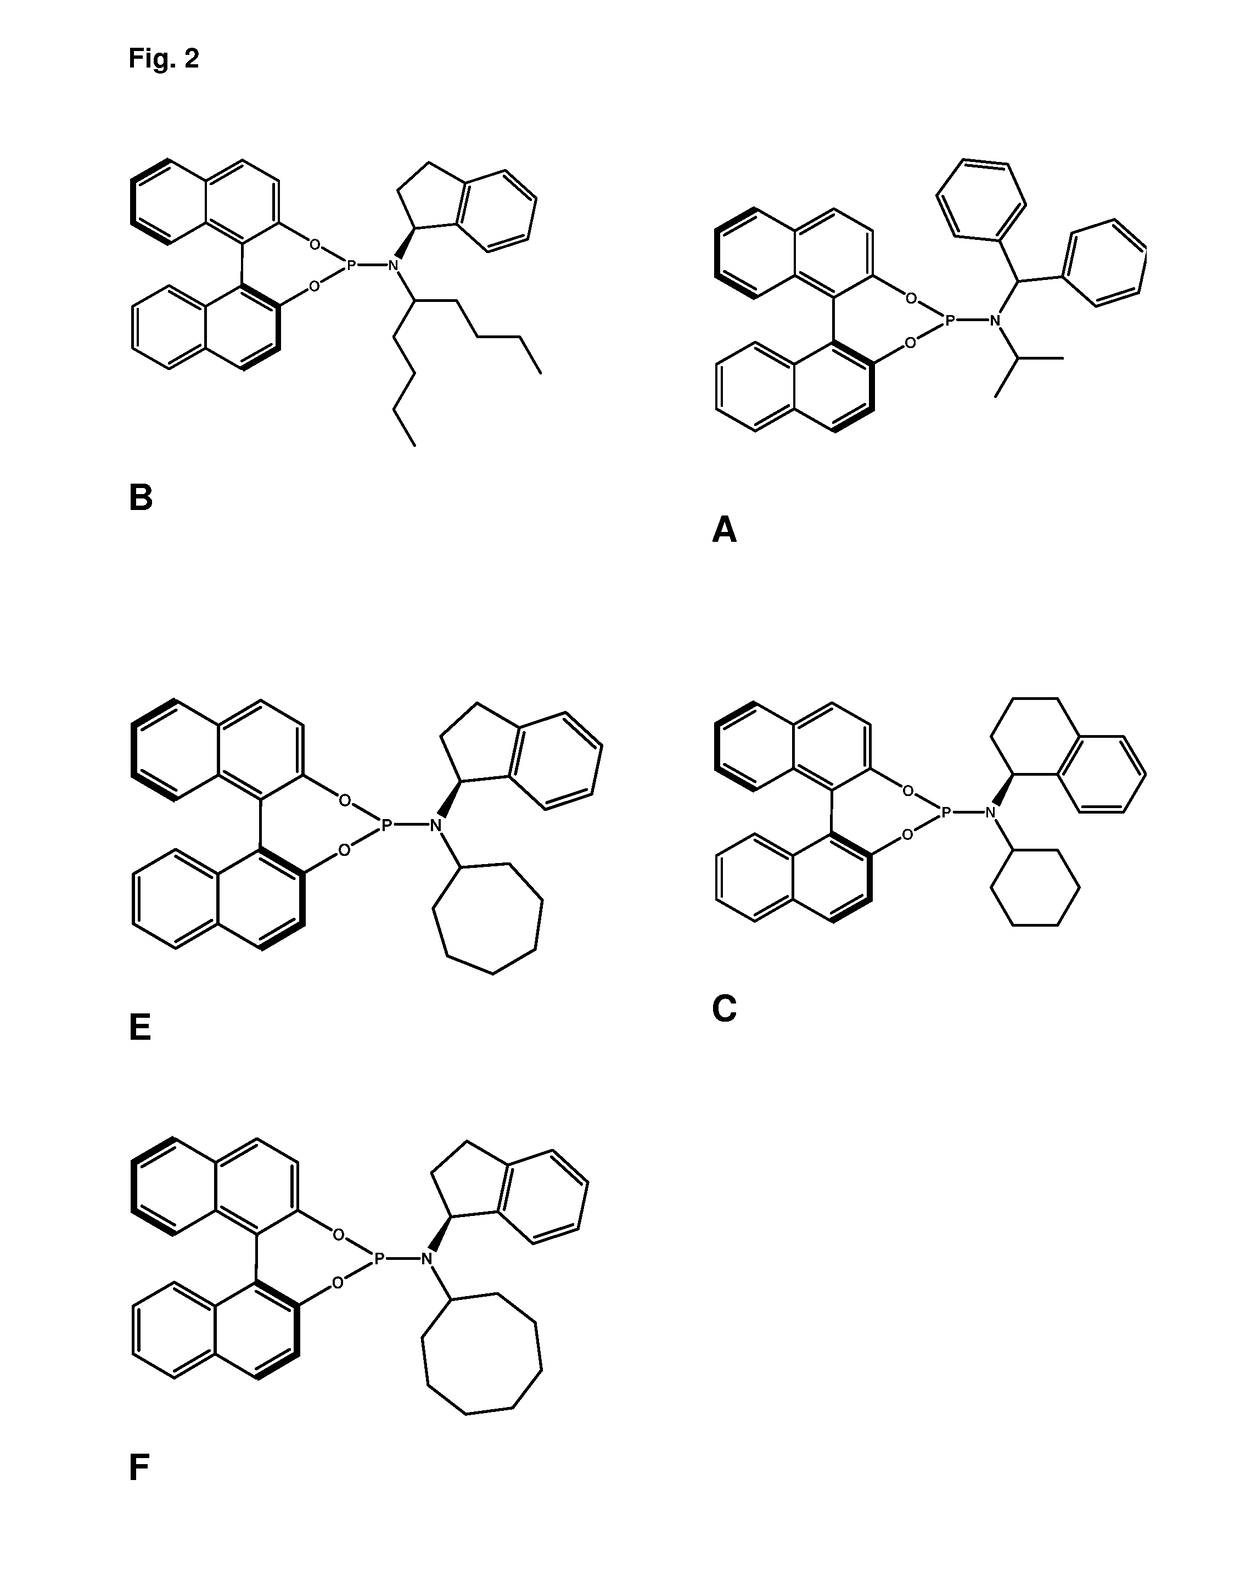 Ligands and catalysts